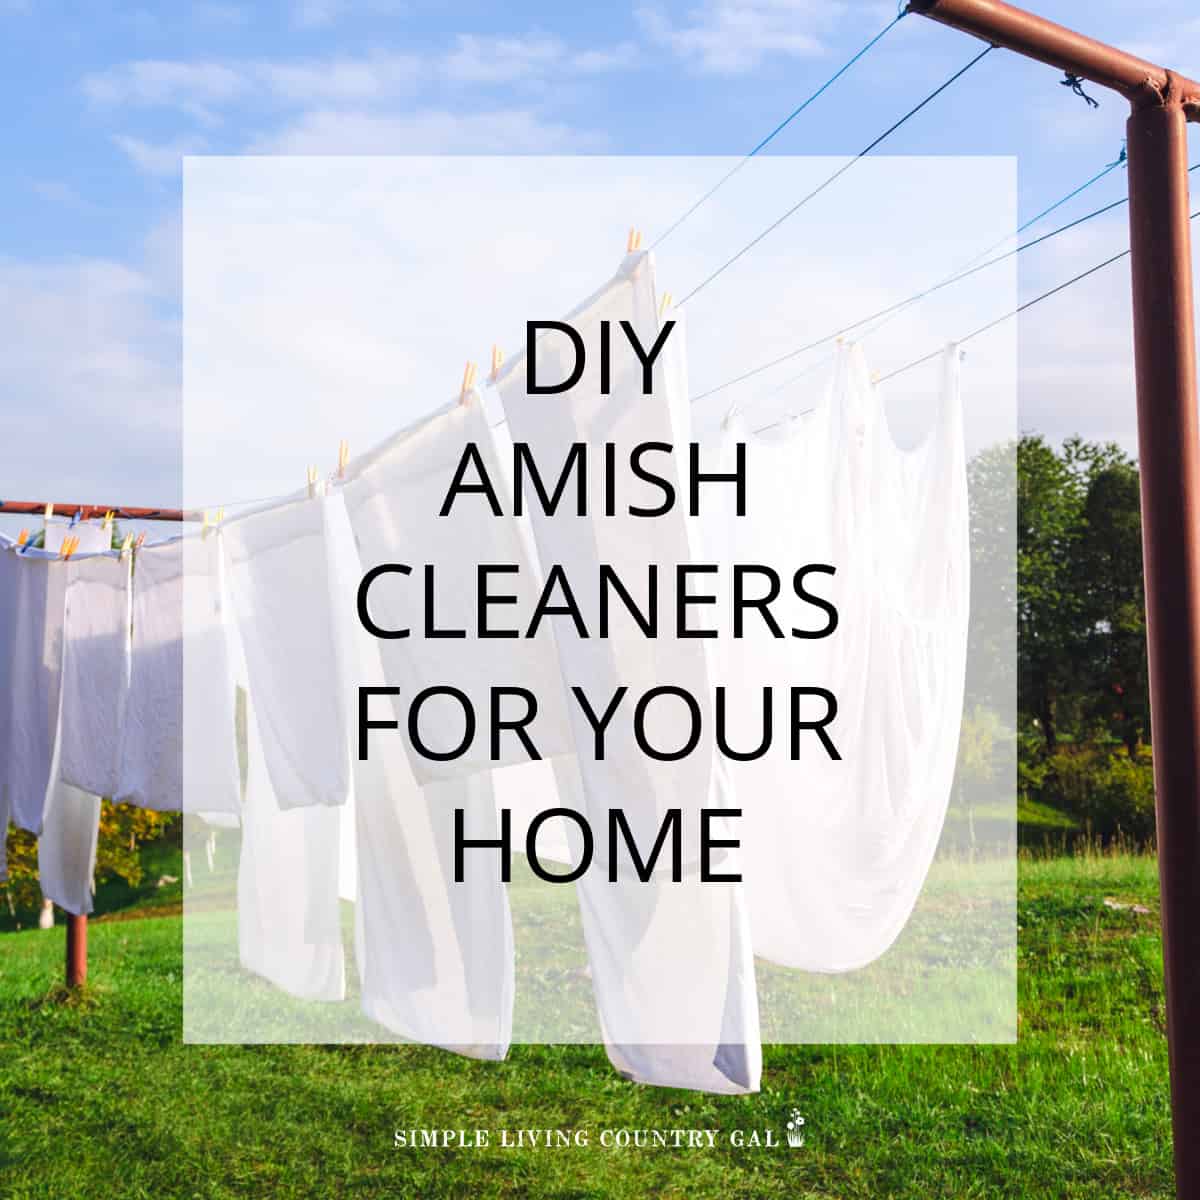 DIY AMISH CLEANERS